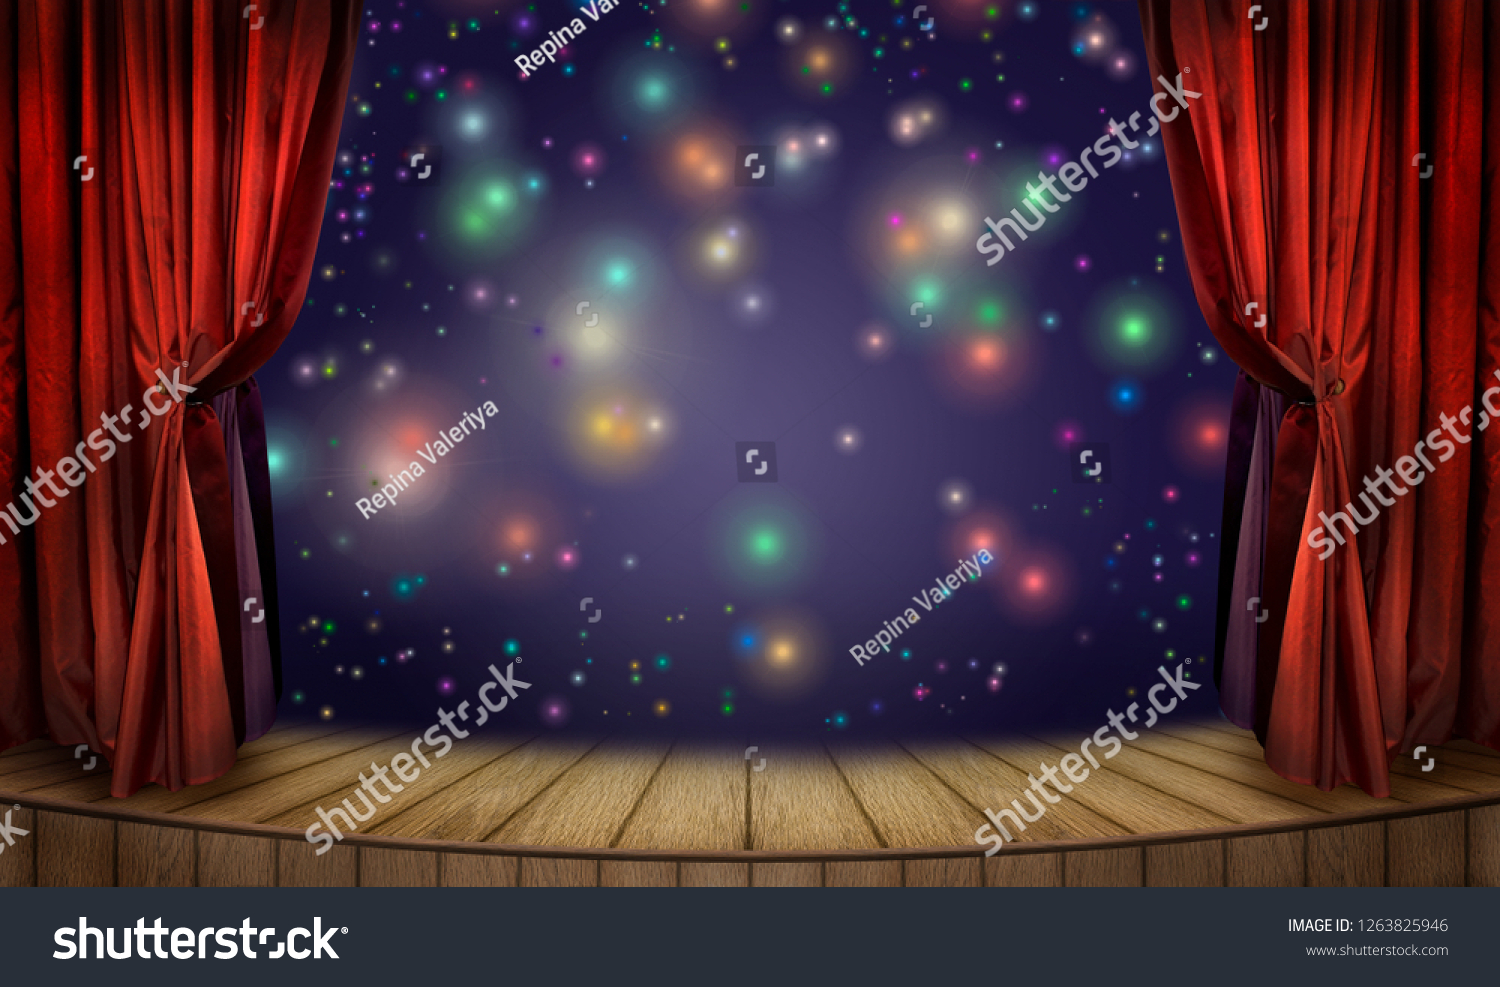 Theater stage with red curtains and spotlight and colorful glow confetti. Theatrical scene in the light of multicolored neon searchlights and glitters, interior of the old theater in festive evening. #1263825946